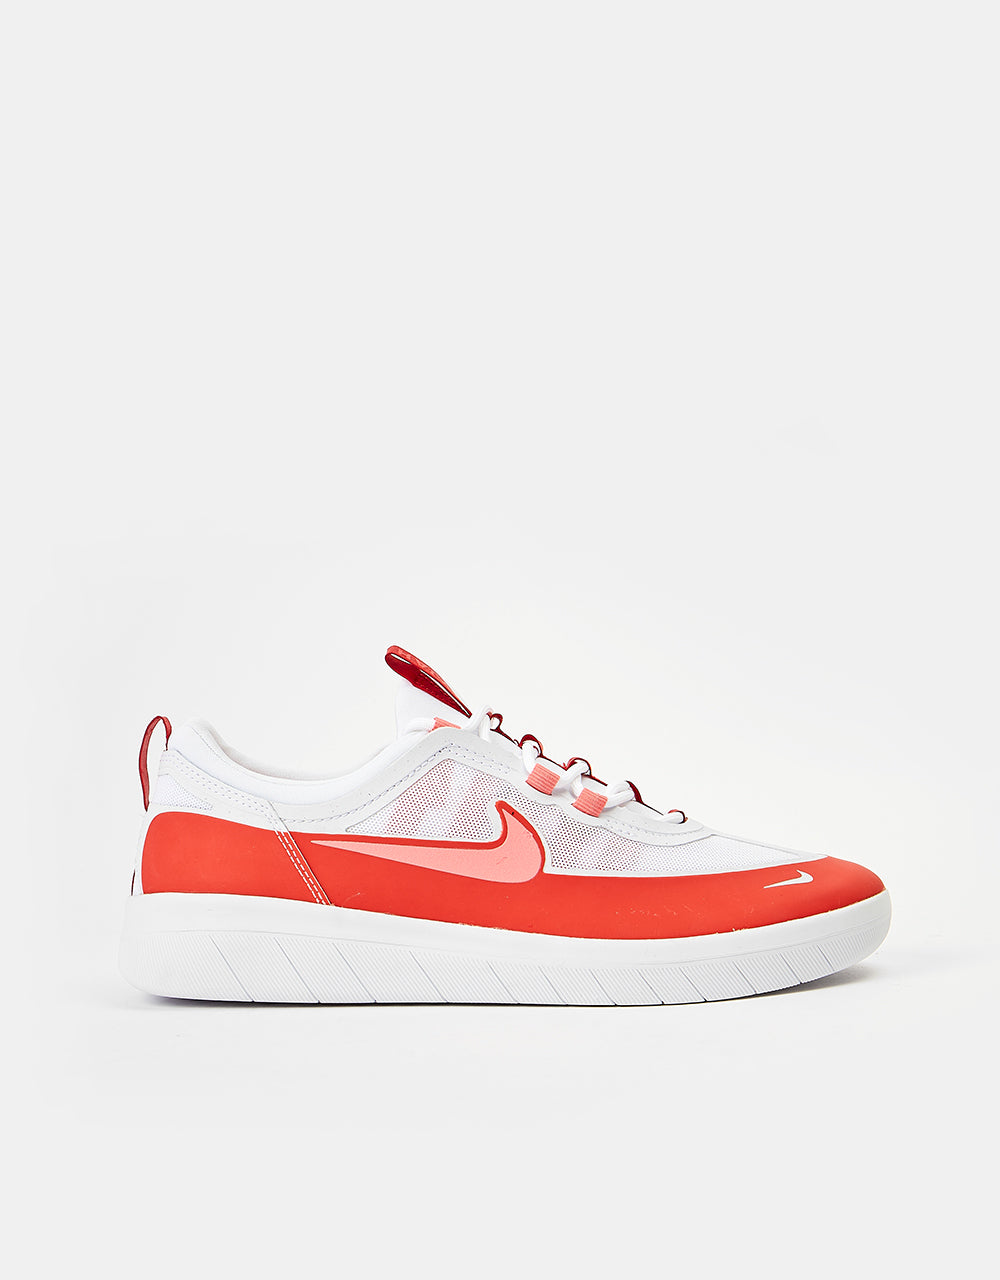 Nike SB Nyjah Free 2 Skate Shoes - Lobster/Pink Gaze -Lobster-White – Route  One